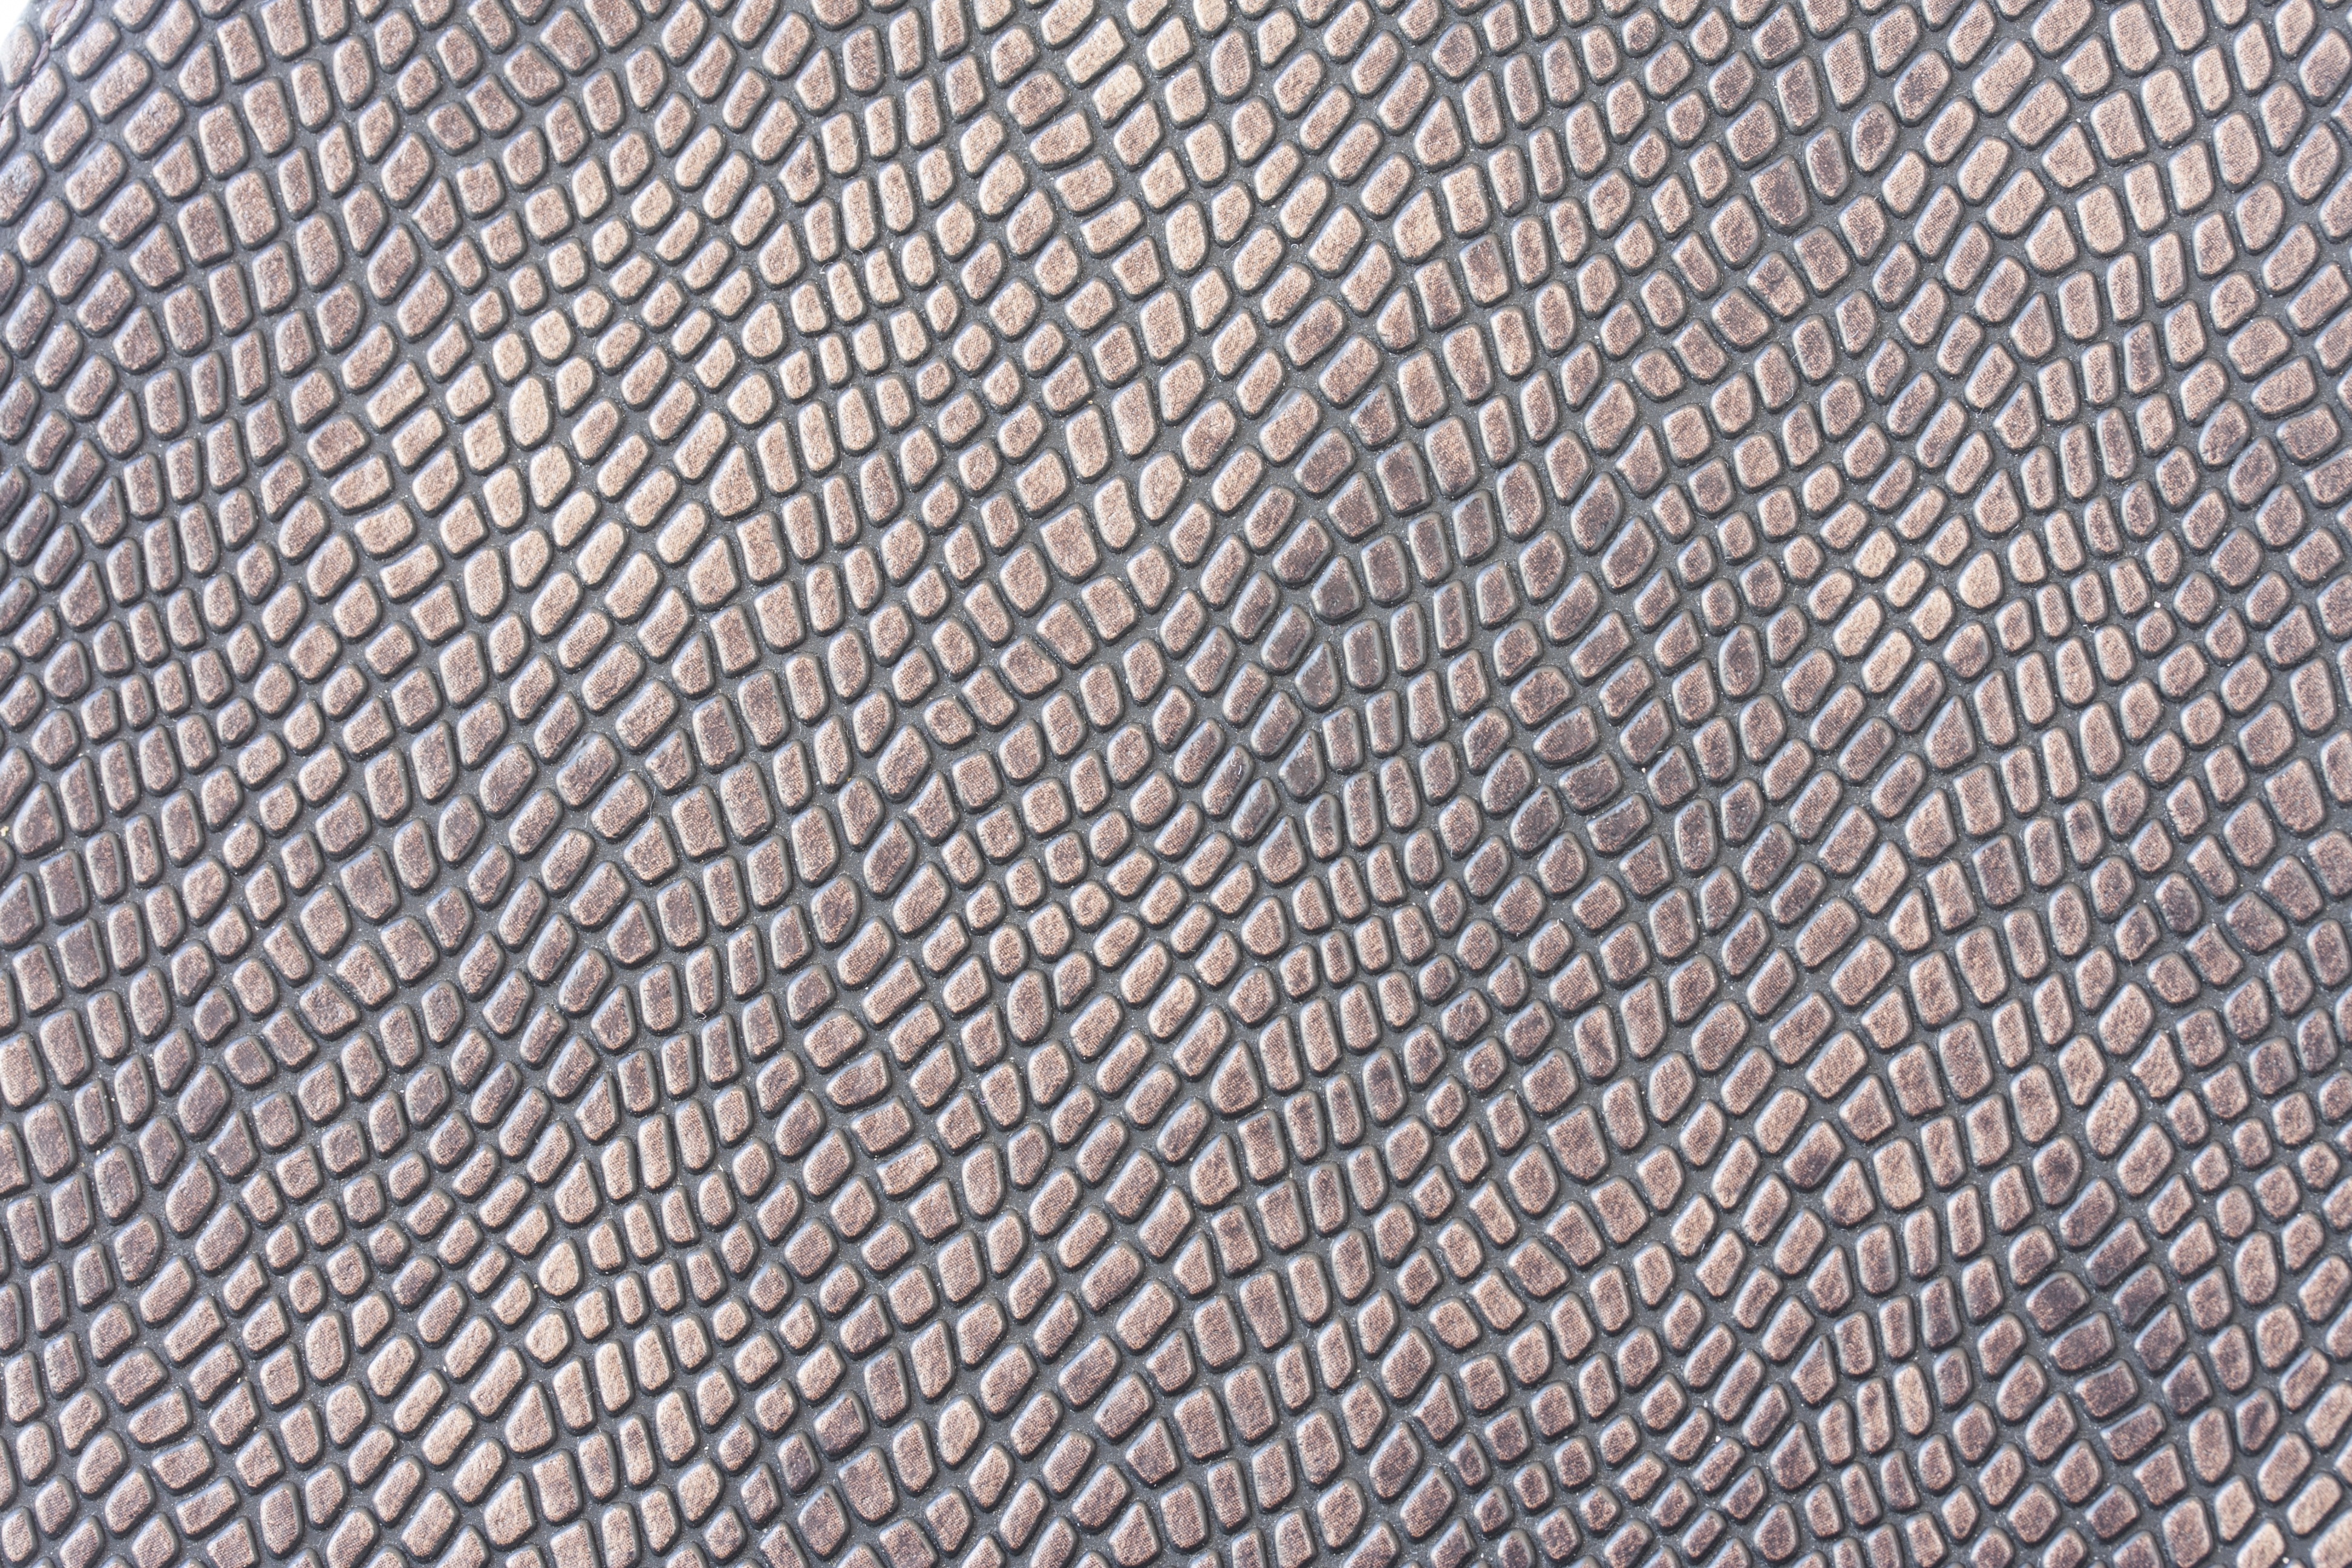 leather, texture, textures, surface, relief, raised, skin cell phone wallpapers